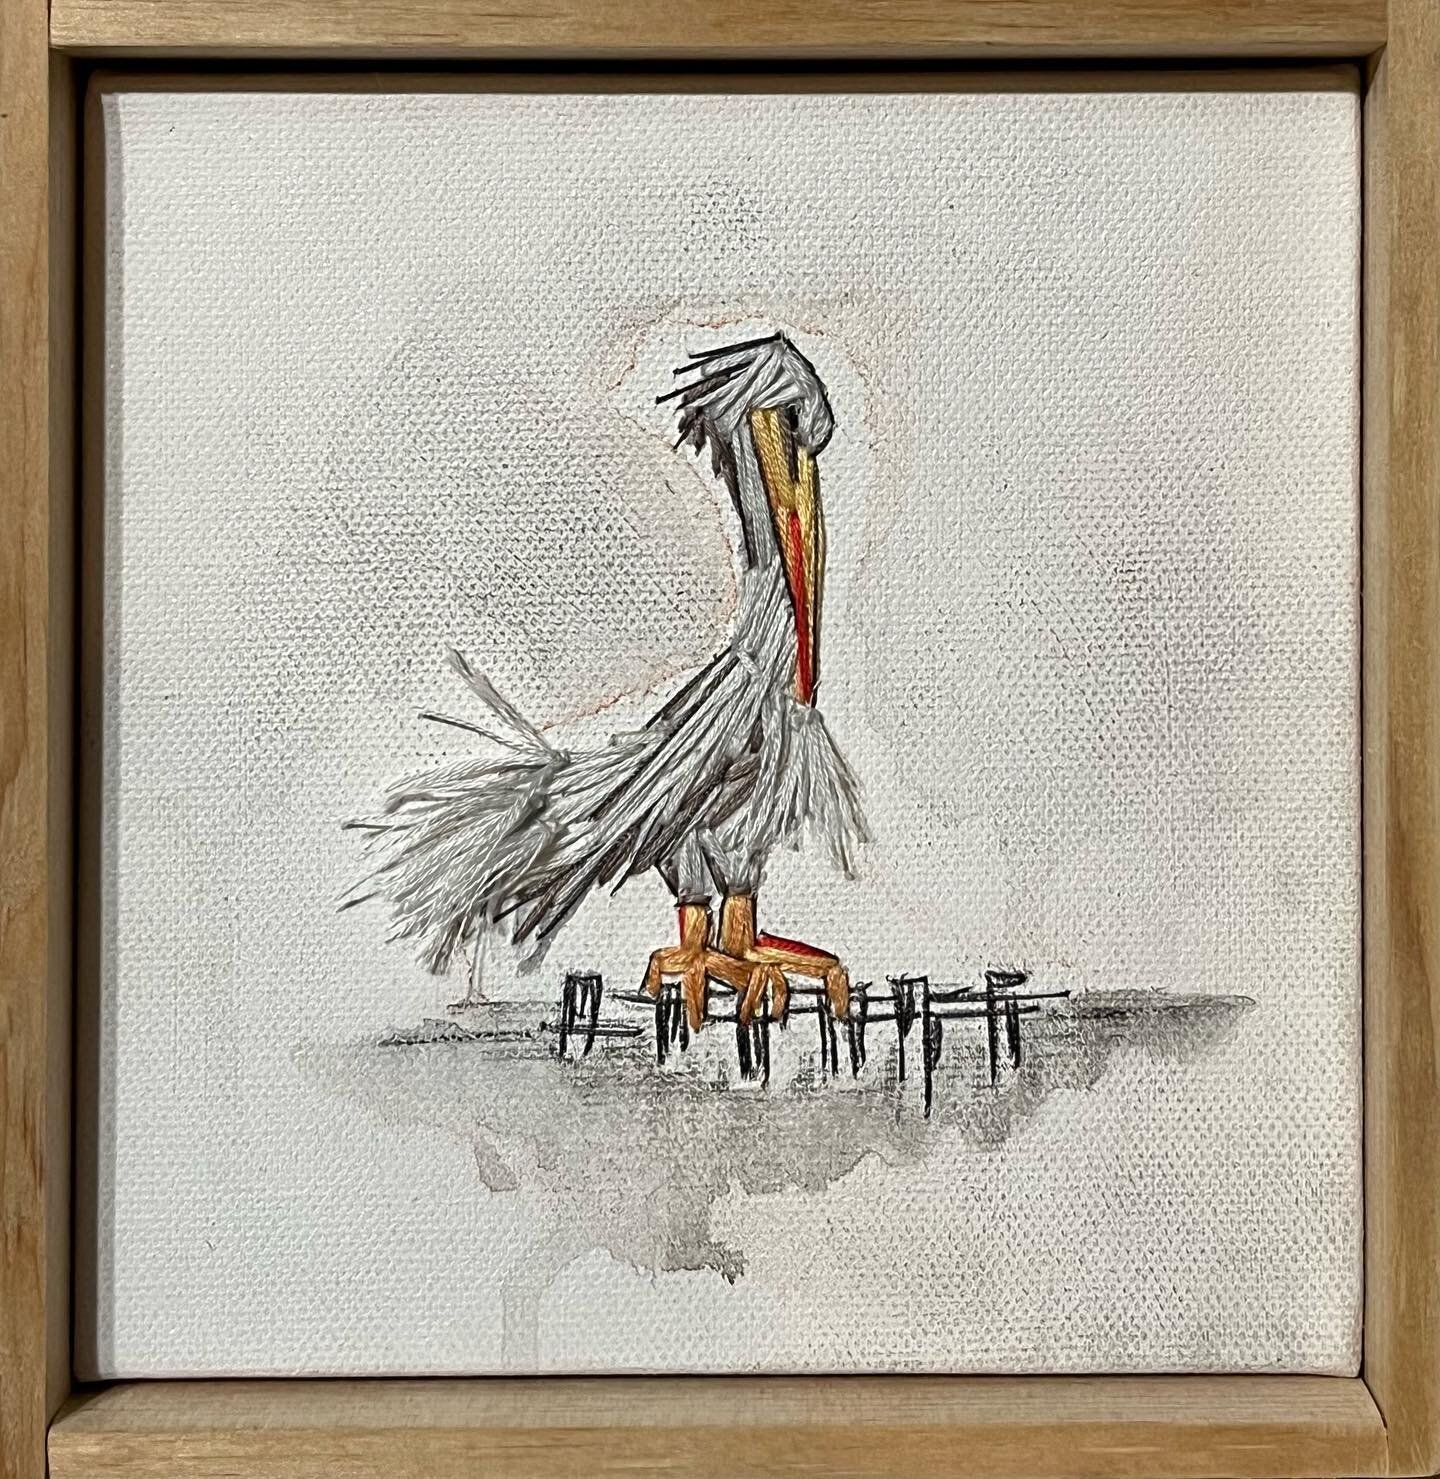 6x6 inch Pelicans. Acrylic and thread on canvas. @cannonbeachgallery Miniatures Show. Running through Dec. 2 nd. Part of this weekends, Stormy Weather Arts Festival Nov. 3-5th.
#cannonbeachoregon #artfestival #minitureart #embroidered #pelican #pelic